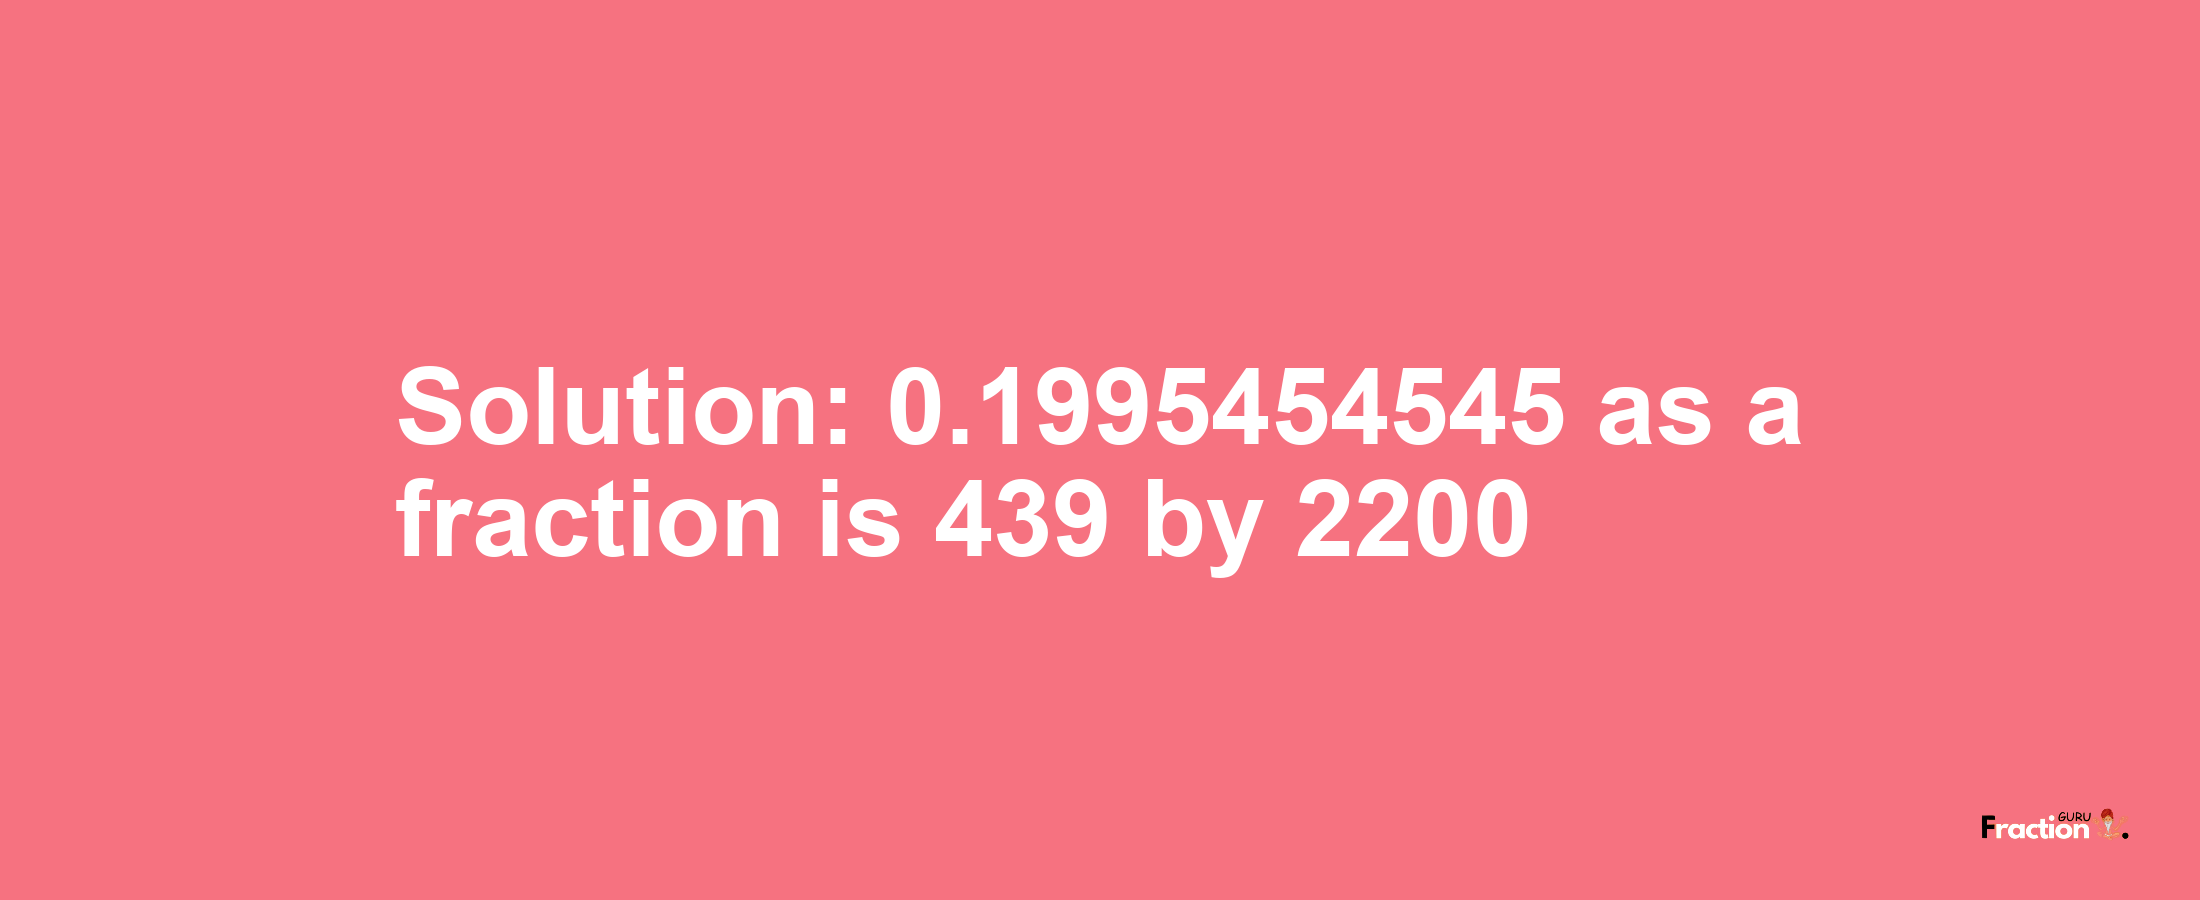 Solution:0.1995454545 as a fraction is 439/2200